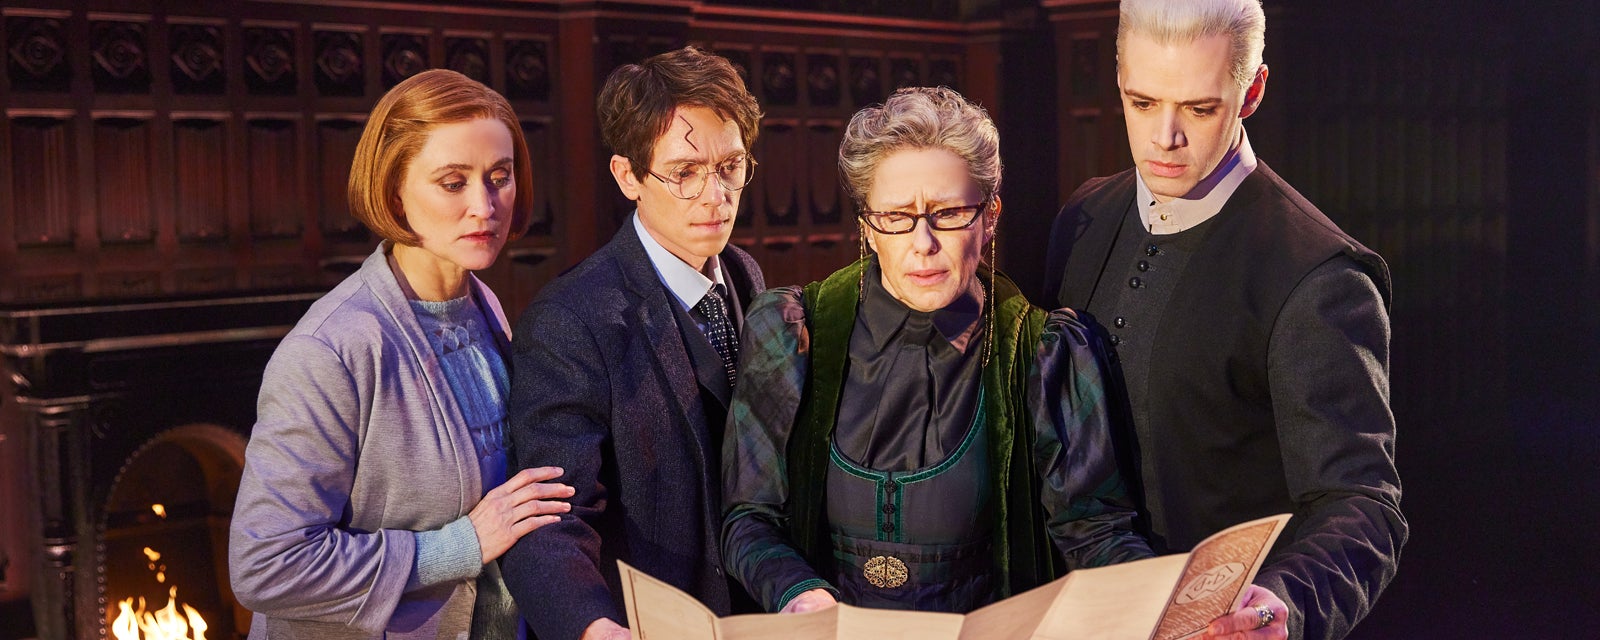 Is a Harry Potter & the Cursed Child Movie Releasing In 2025?